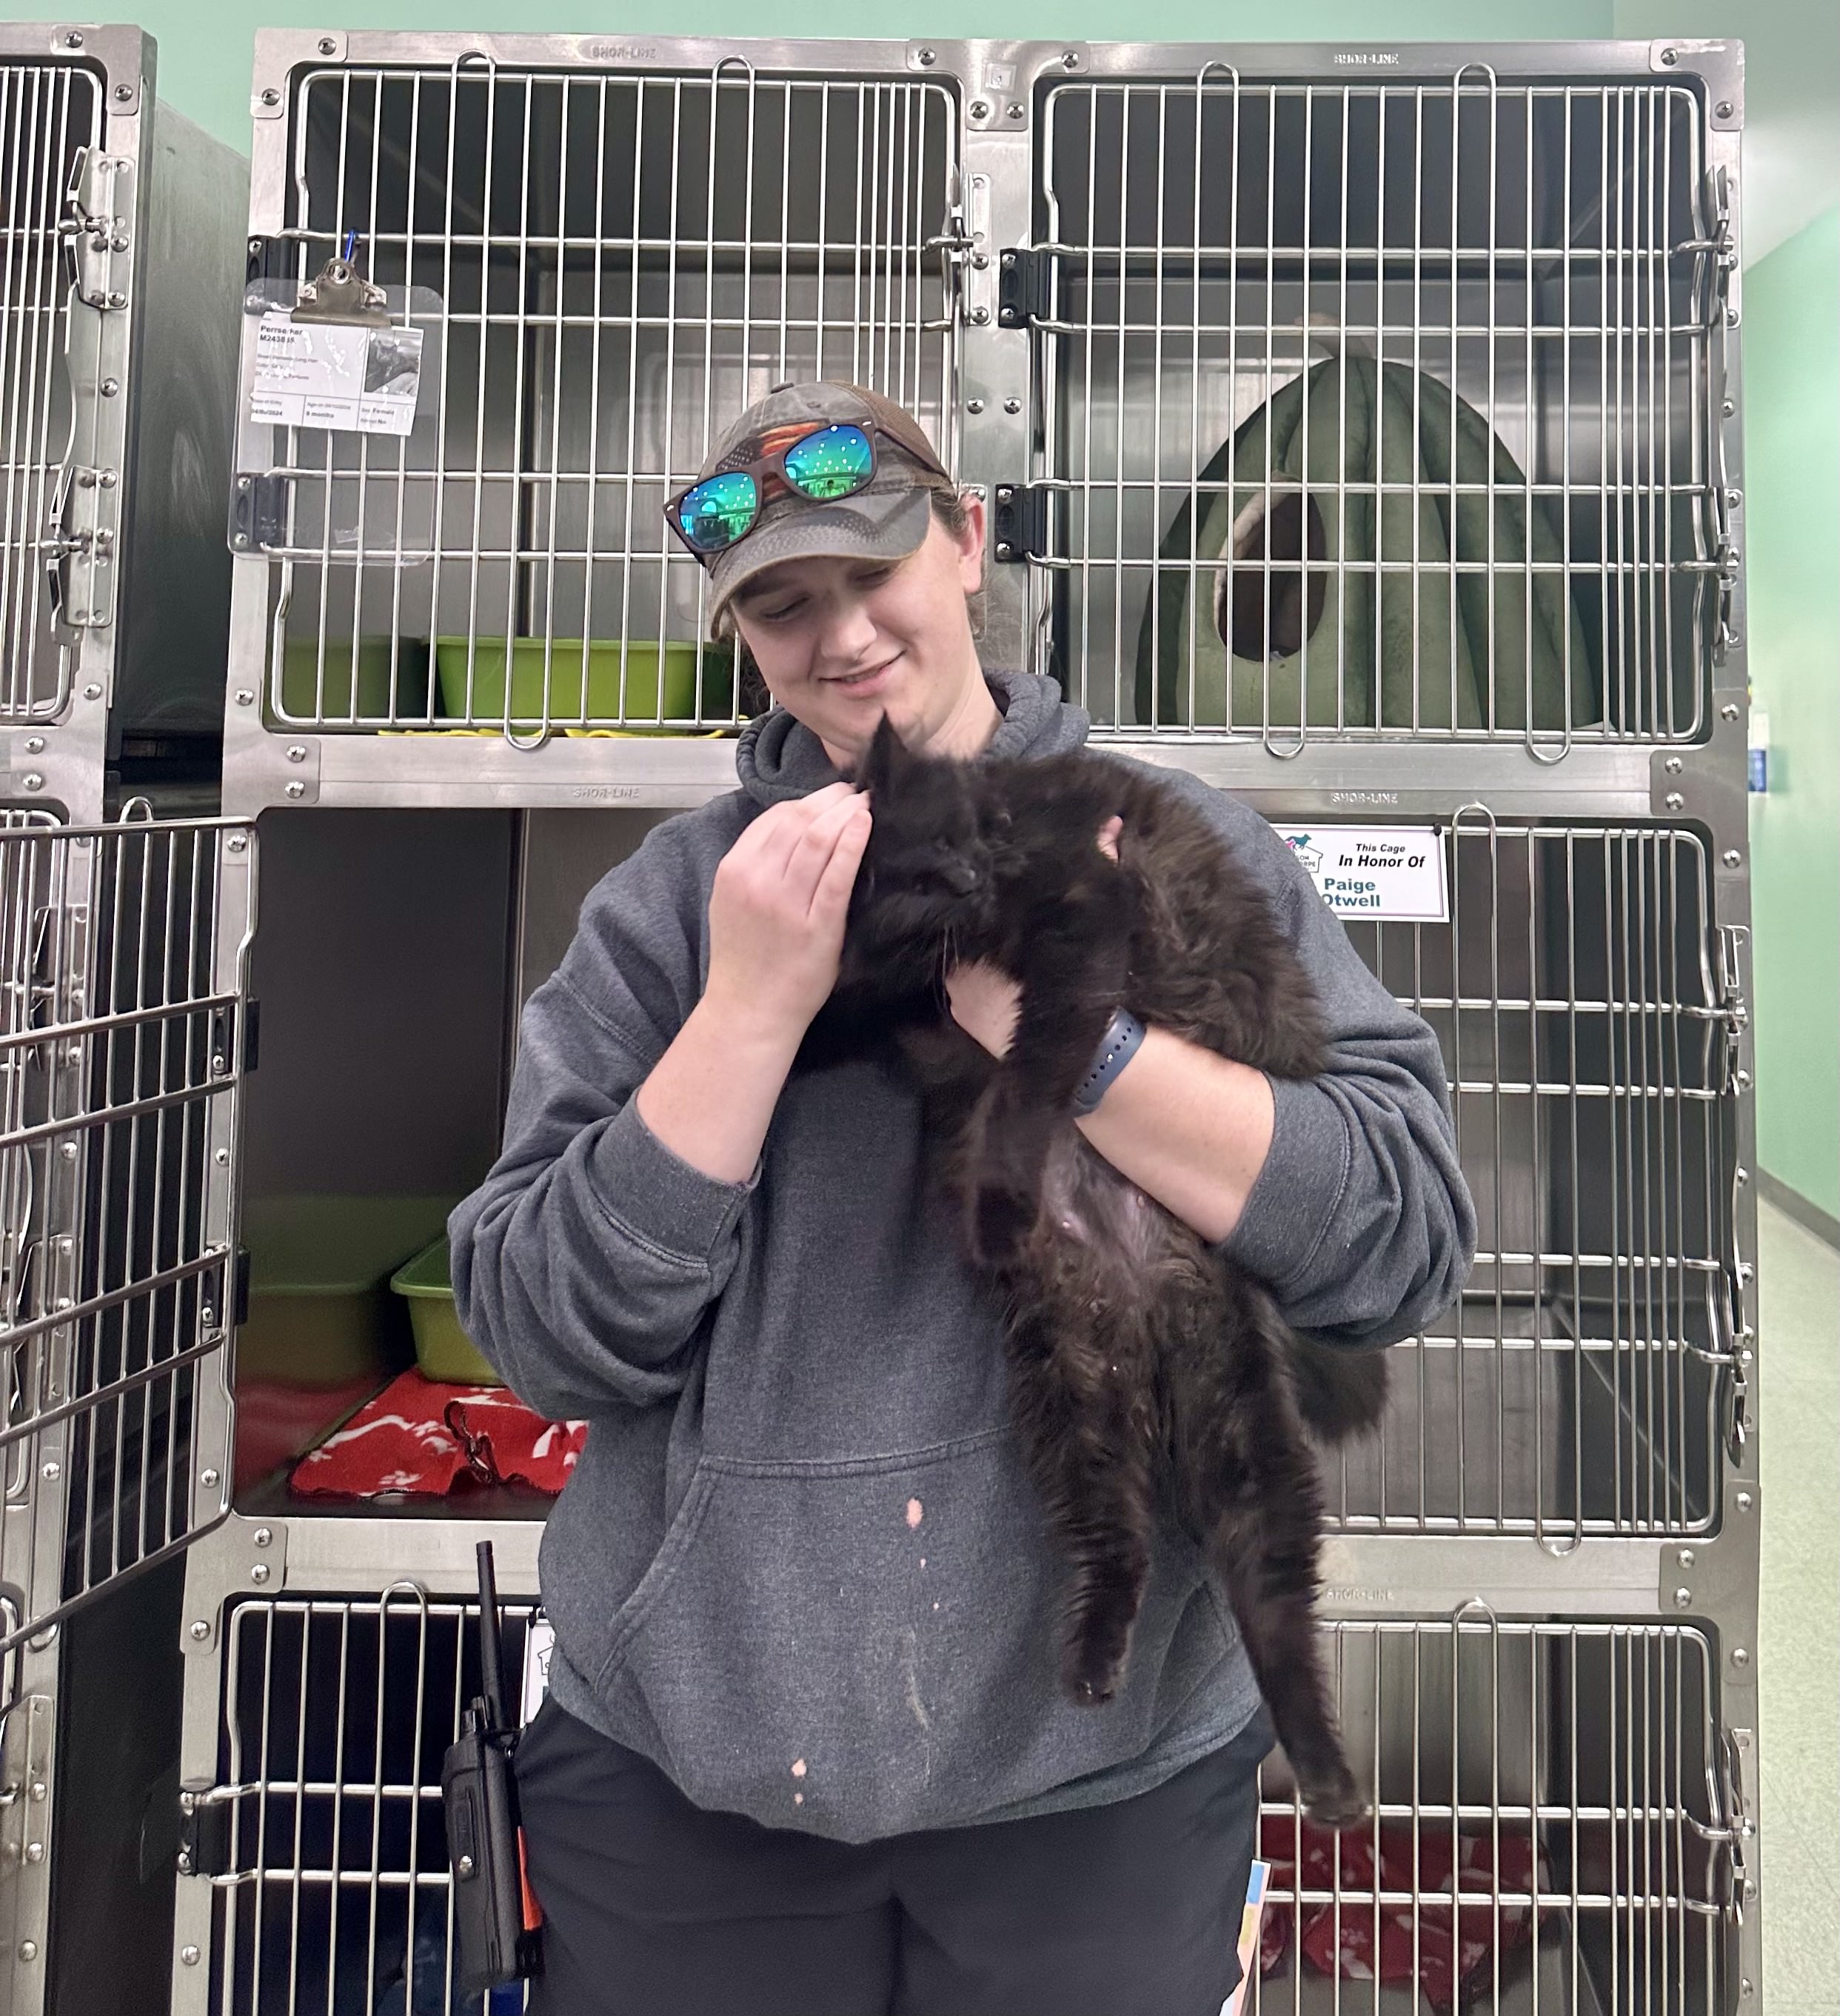 MOAS shelter manager Juli Huth holds Athena, a black cat that is available for adoption and sponsorship through the MOAS sponsorship program. Cats have a standard fee of $65, or $75 to include a microchip. 